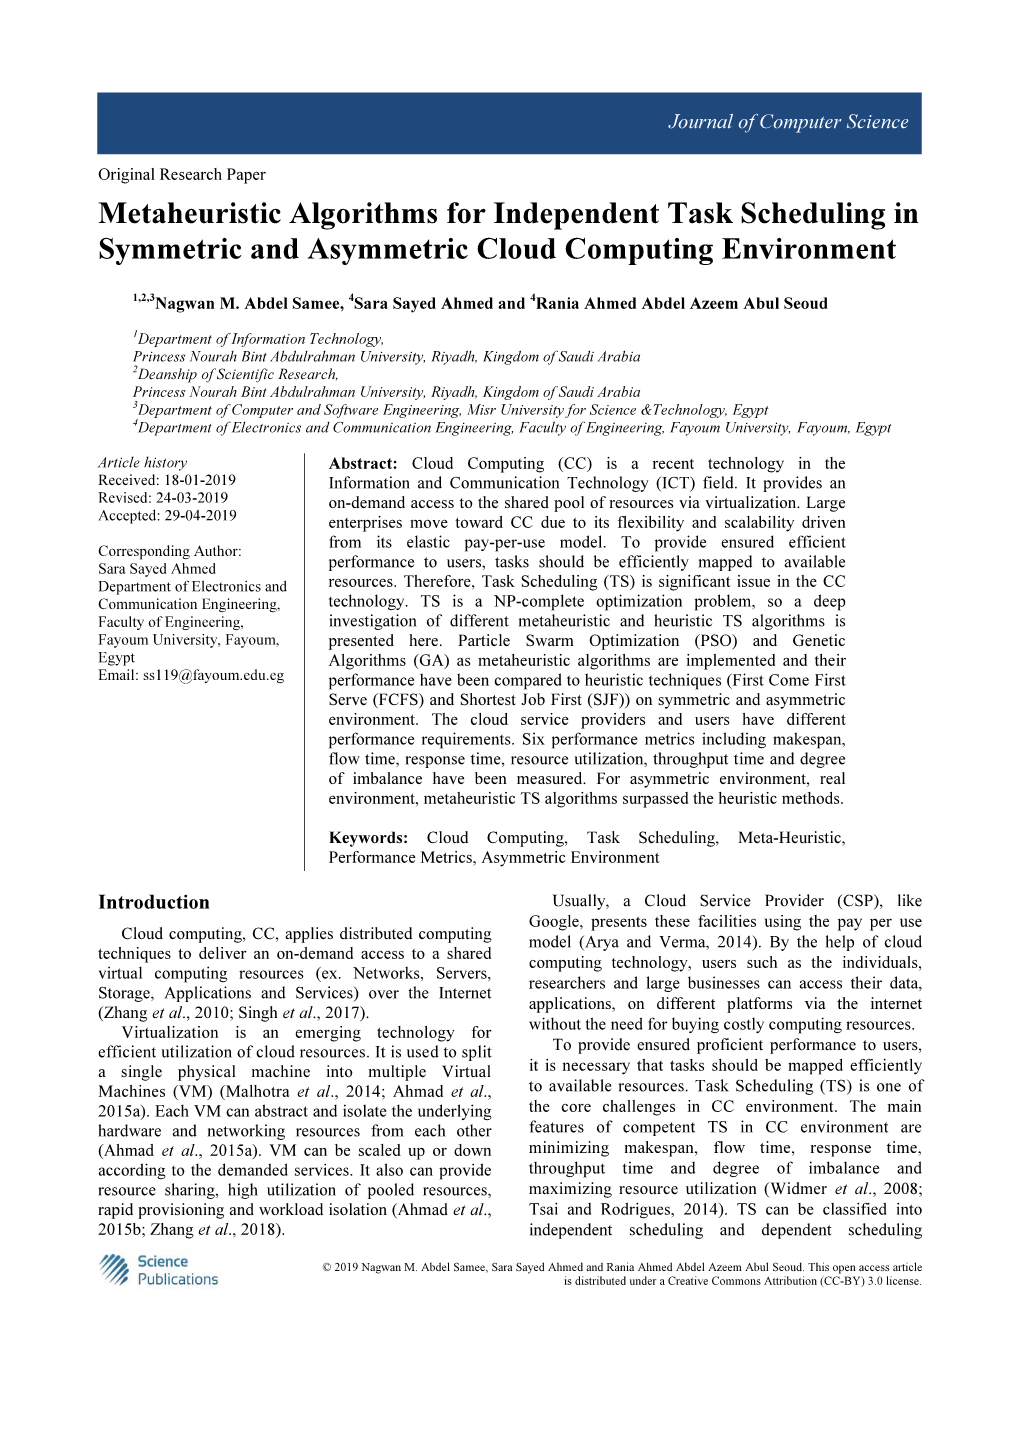 Metaheuristic Algorithms for Independent Task Scheduling in Symmetric and Asymmetric Cloud Computing Environment